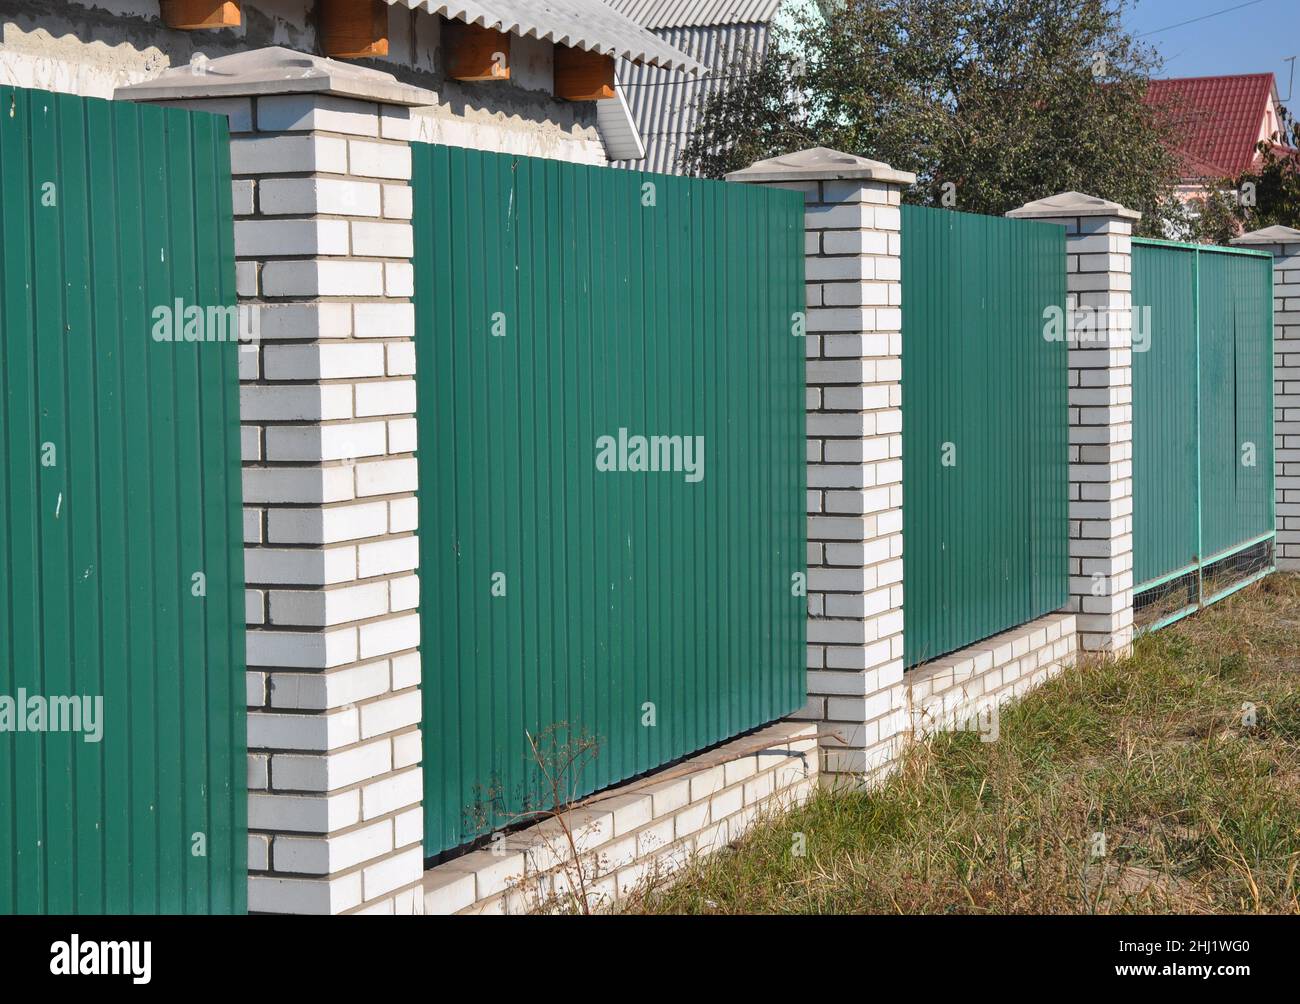 Green Metal Gate Fence with white bricks. Steel sheets fence. Stock Photo